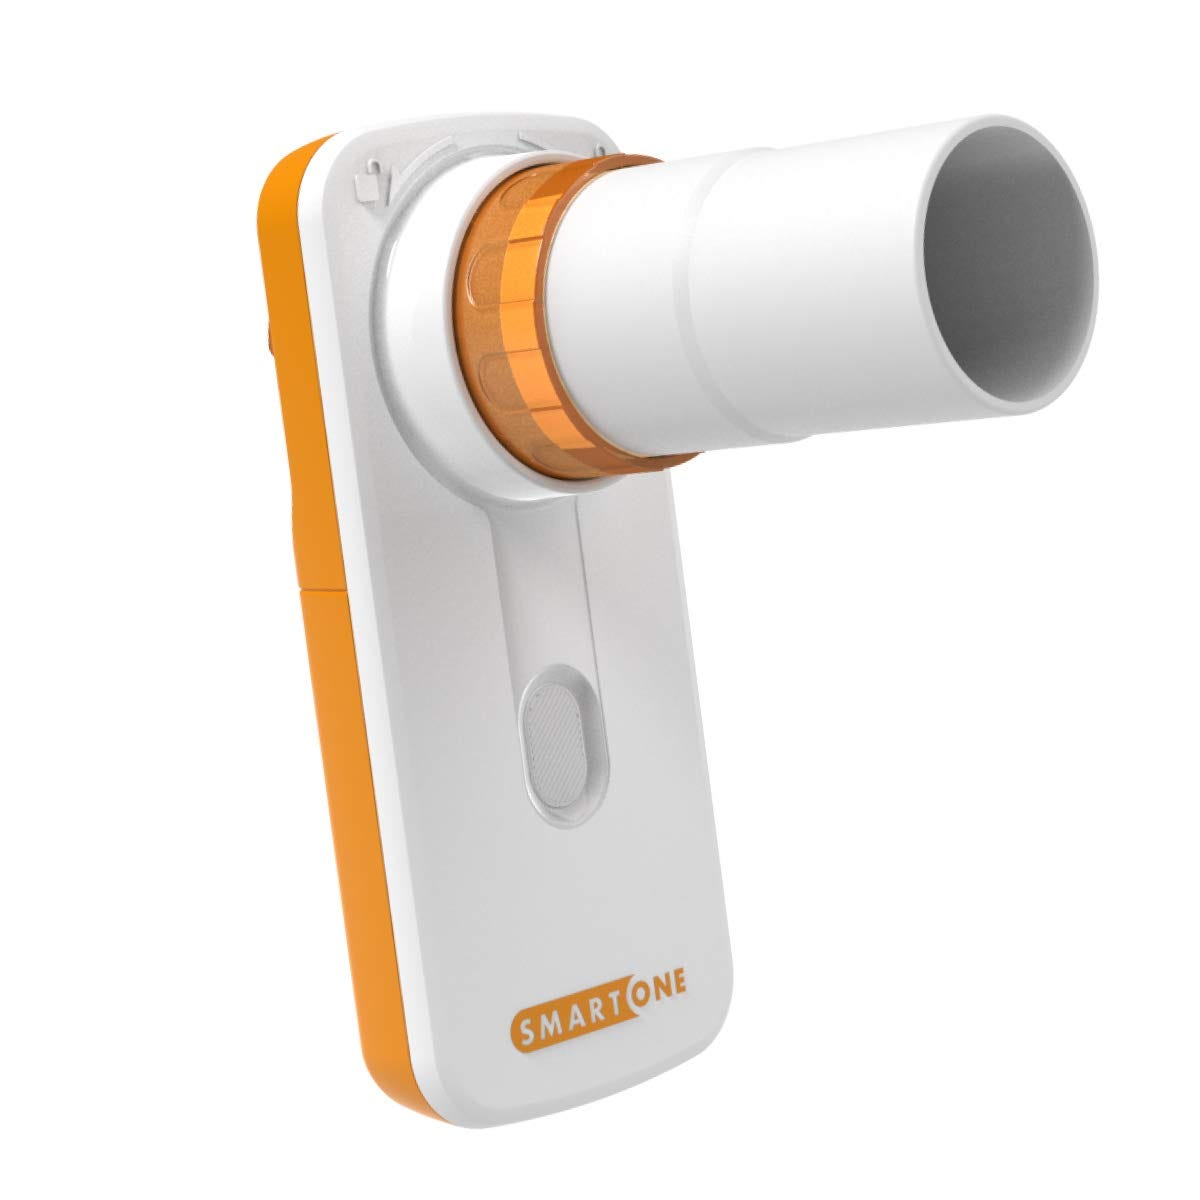 Picture of the home spirometer